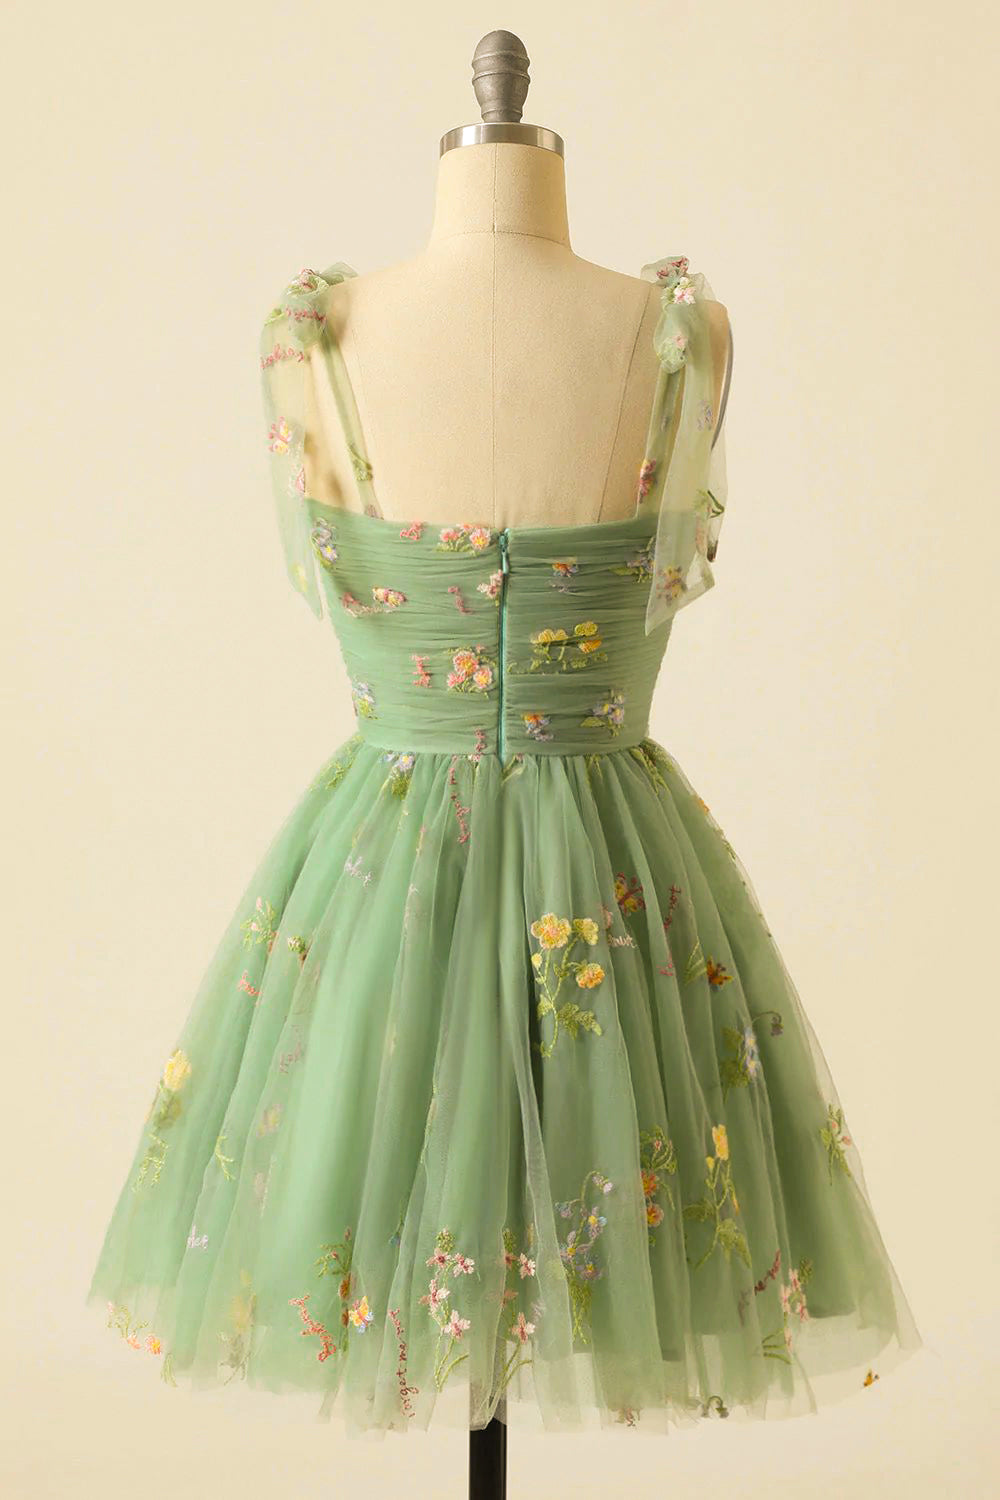 Cute A Line Green Spaghetti Straps Short Homecoming Dress with Embroidery